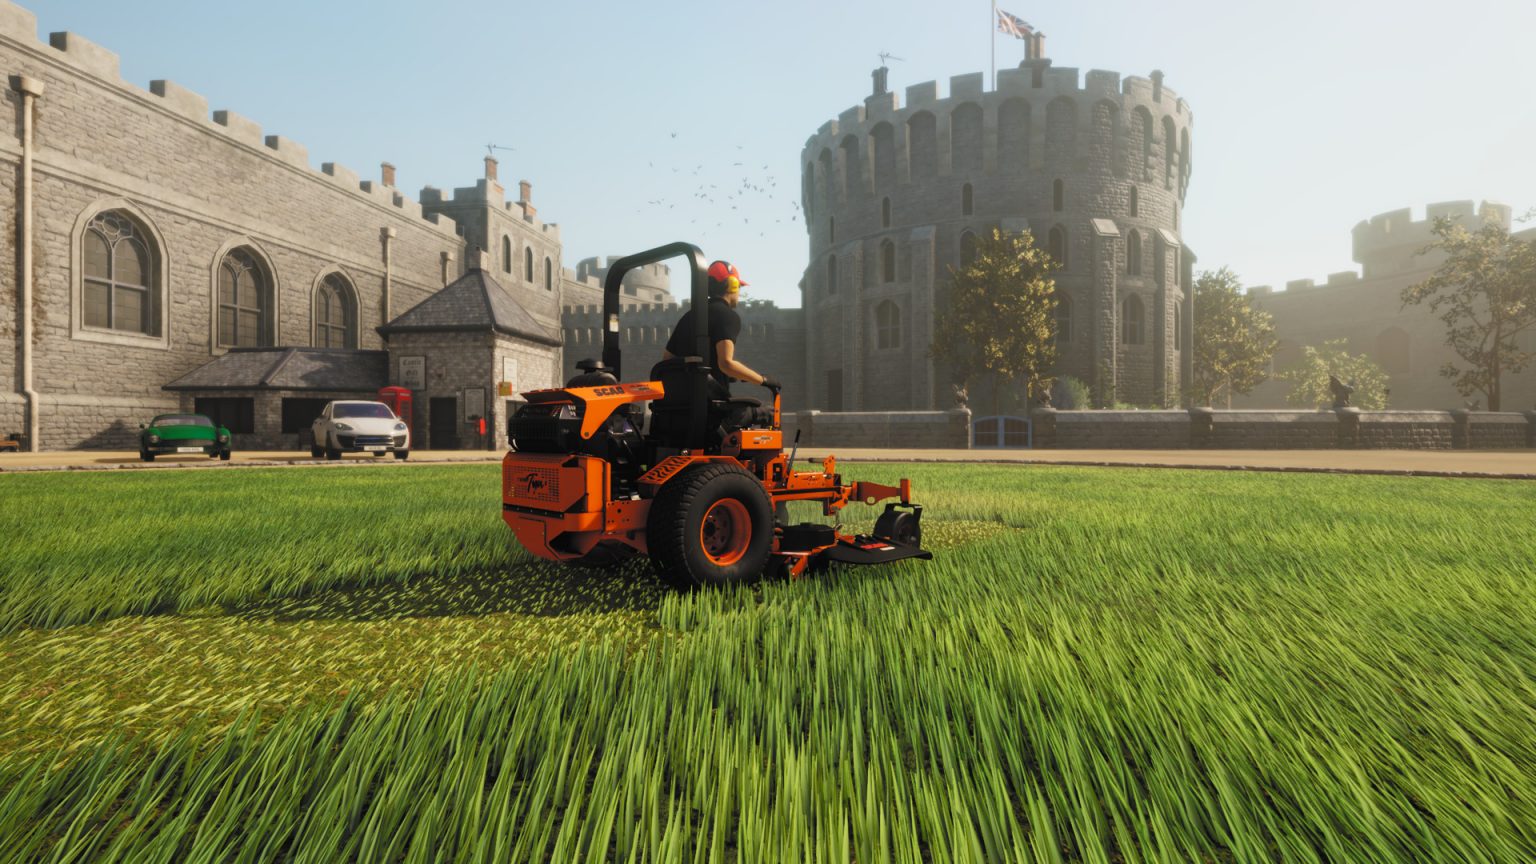 Lawn Mowing Simulator will mow your garden on August 10